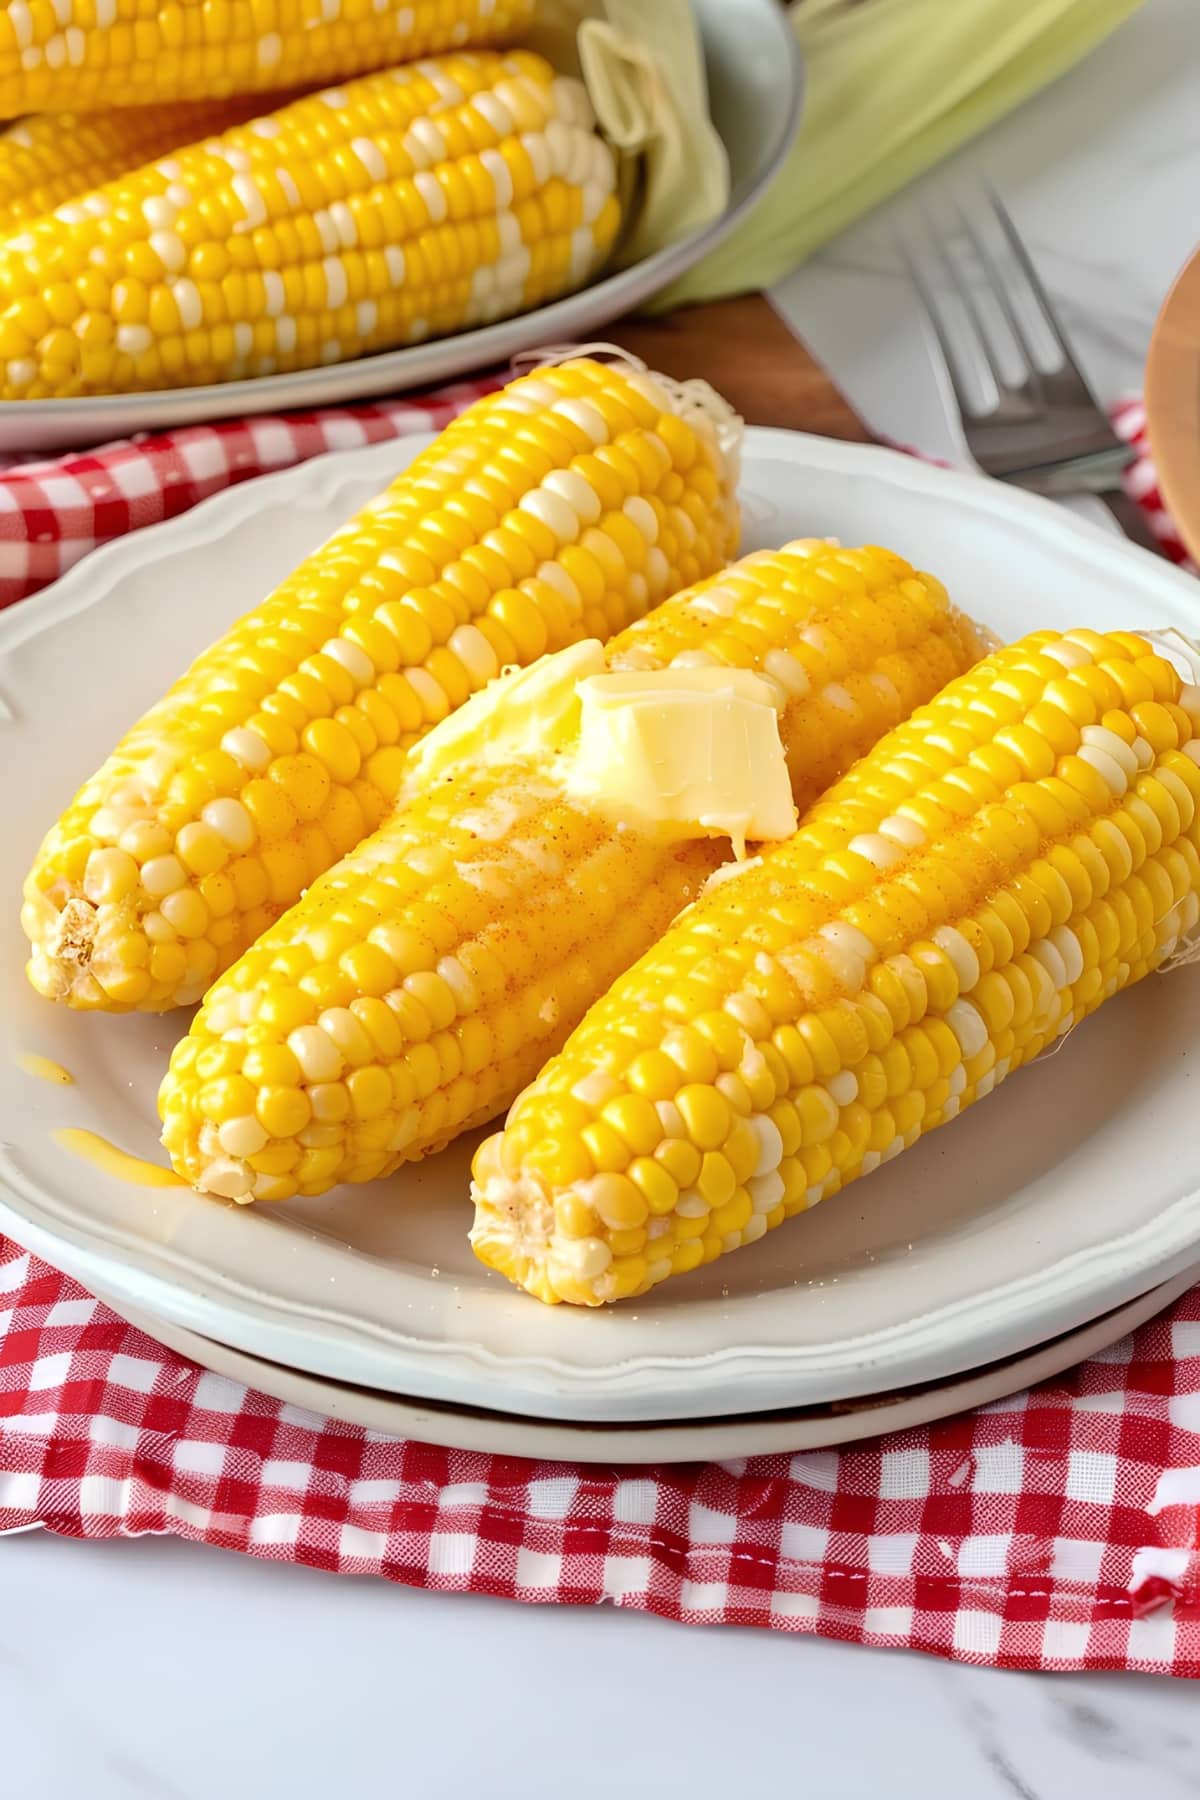 Two corn cobs on a plate, topped with a dollop of butter, ready to be enjoyed.